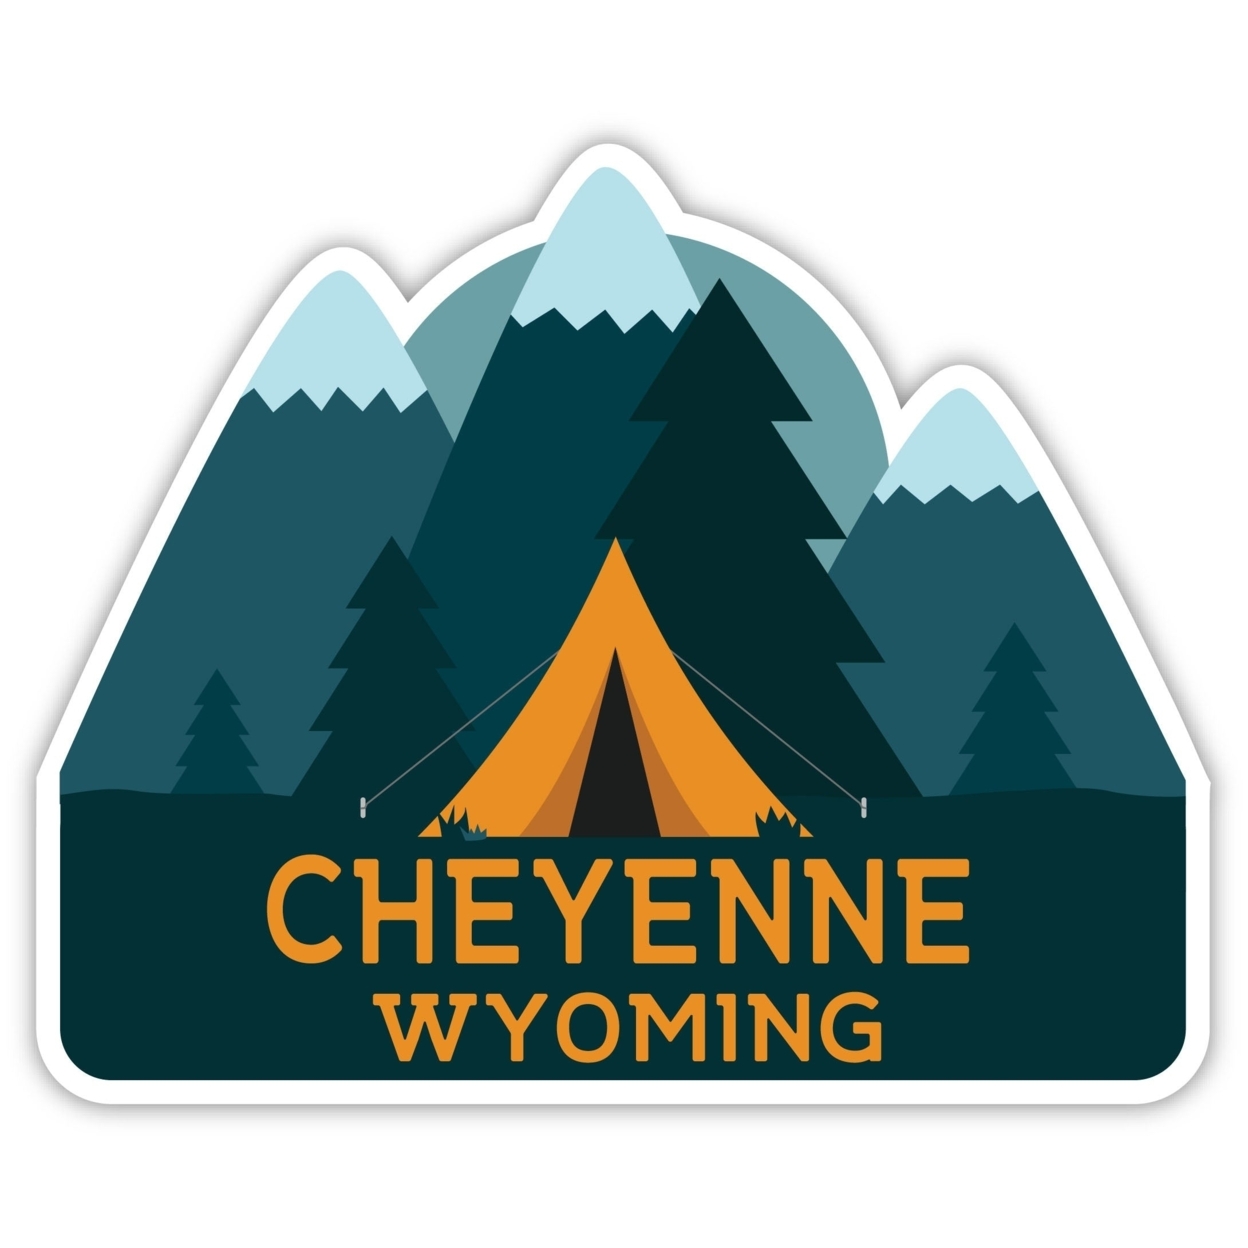 Cheyenne Wyoming Souvenir Decorative Stickers (Choose Theme And Size) - 4-Pack, 8-Inch, Bear